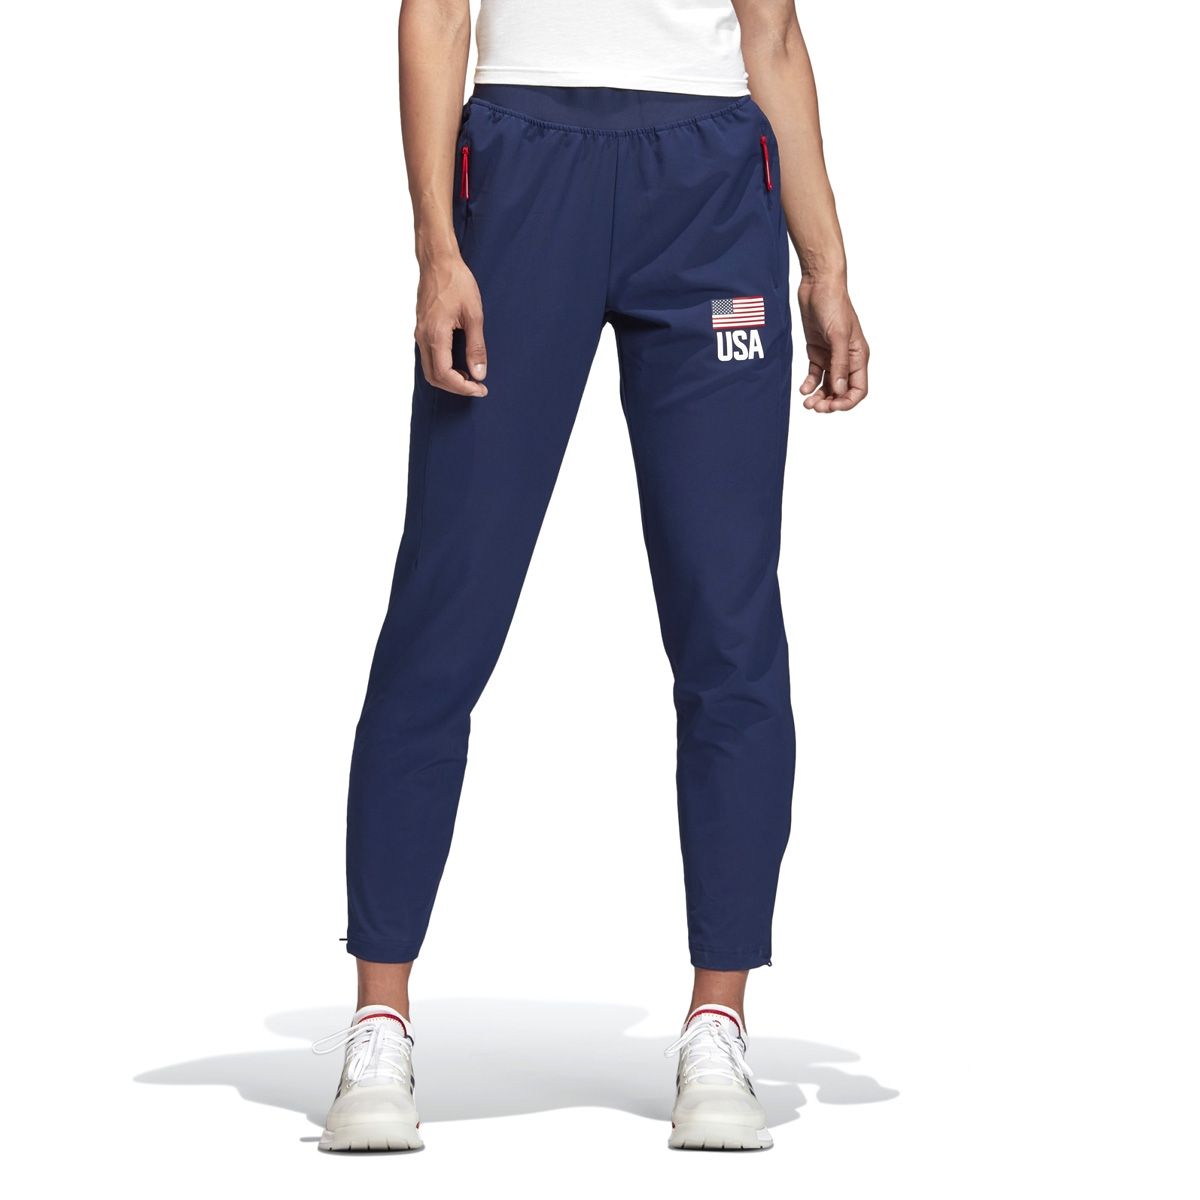 adidas USA Volleyball Pant - Women's Volleyball